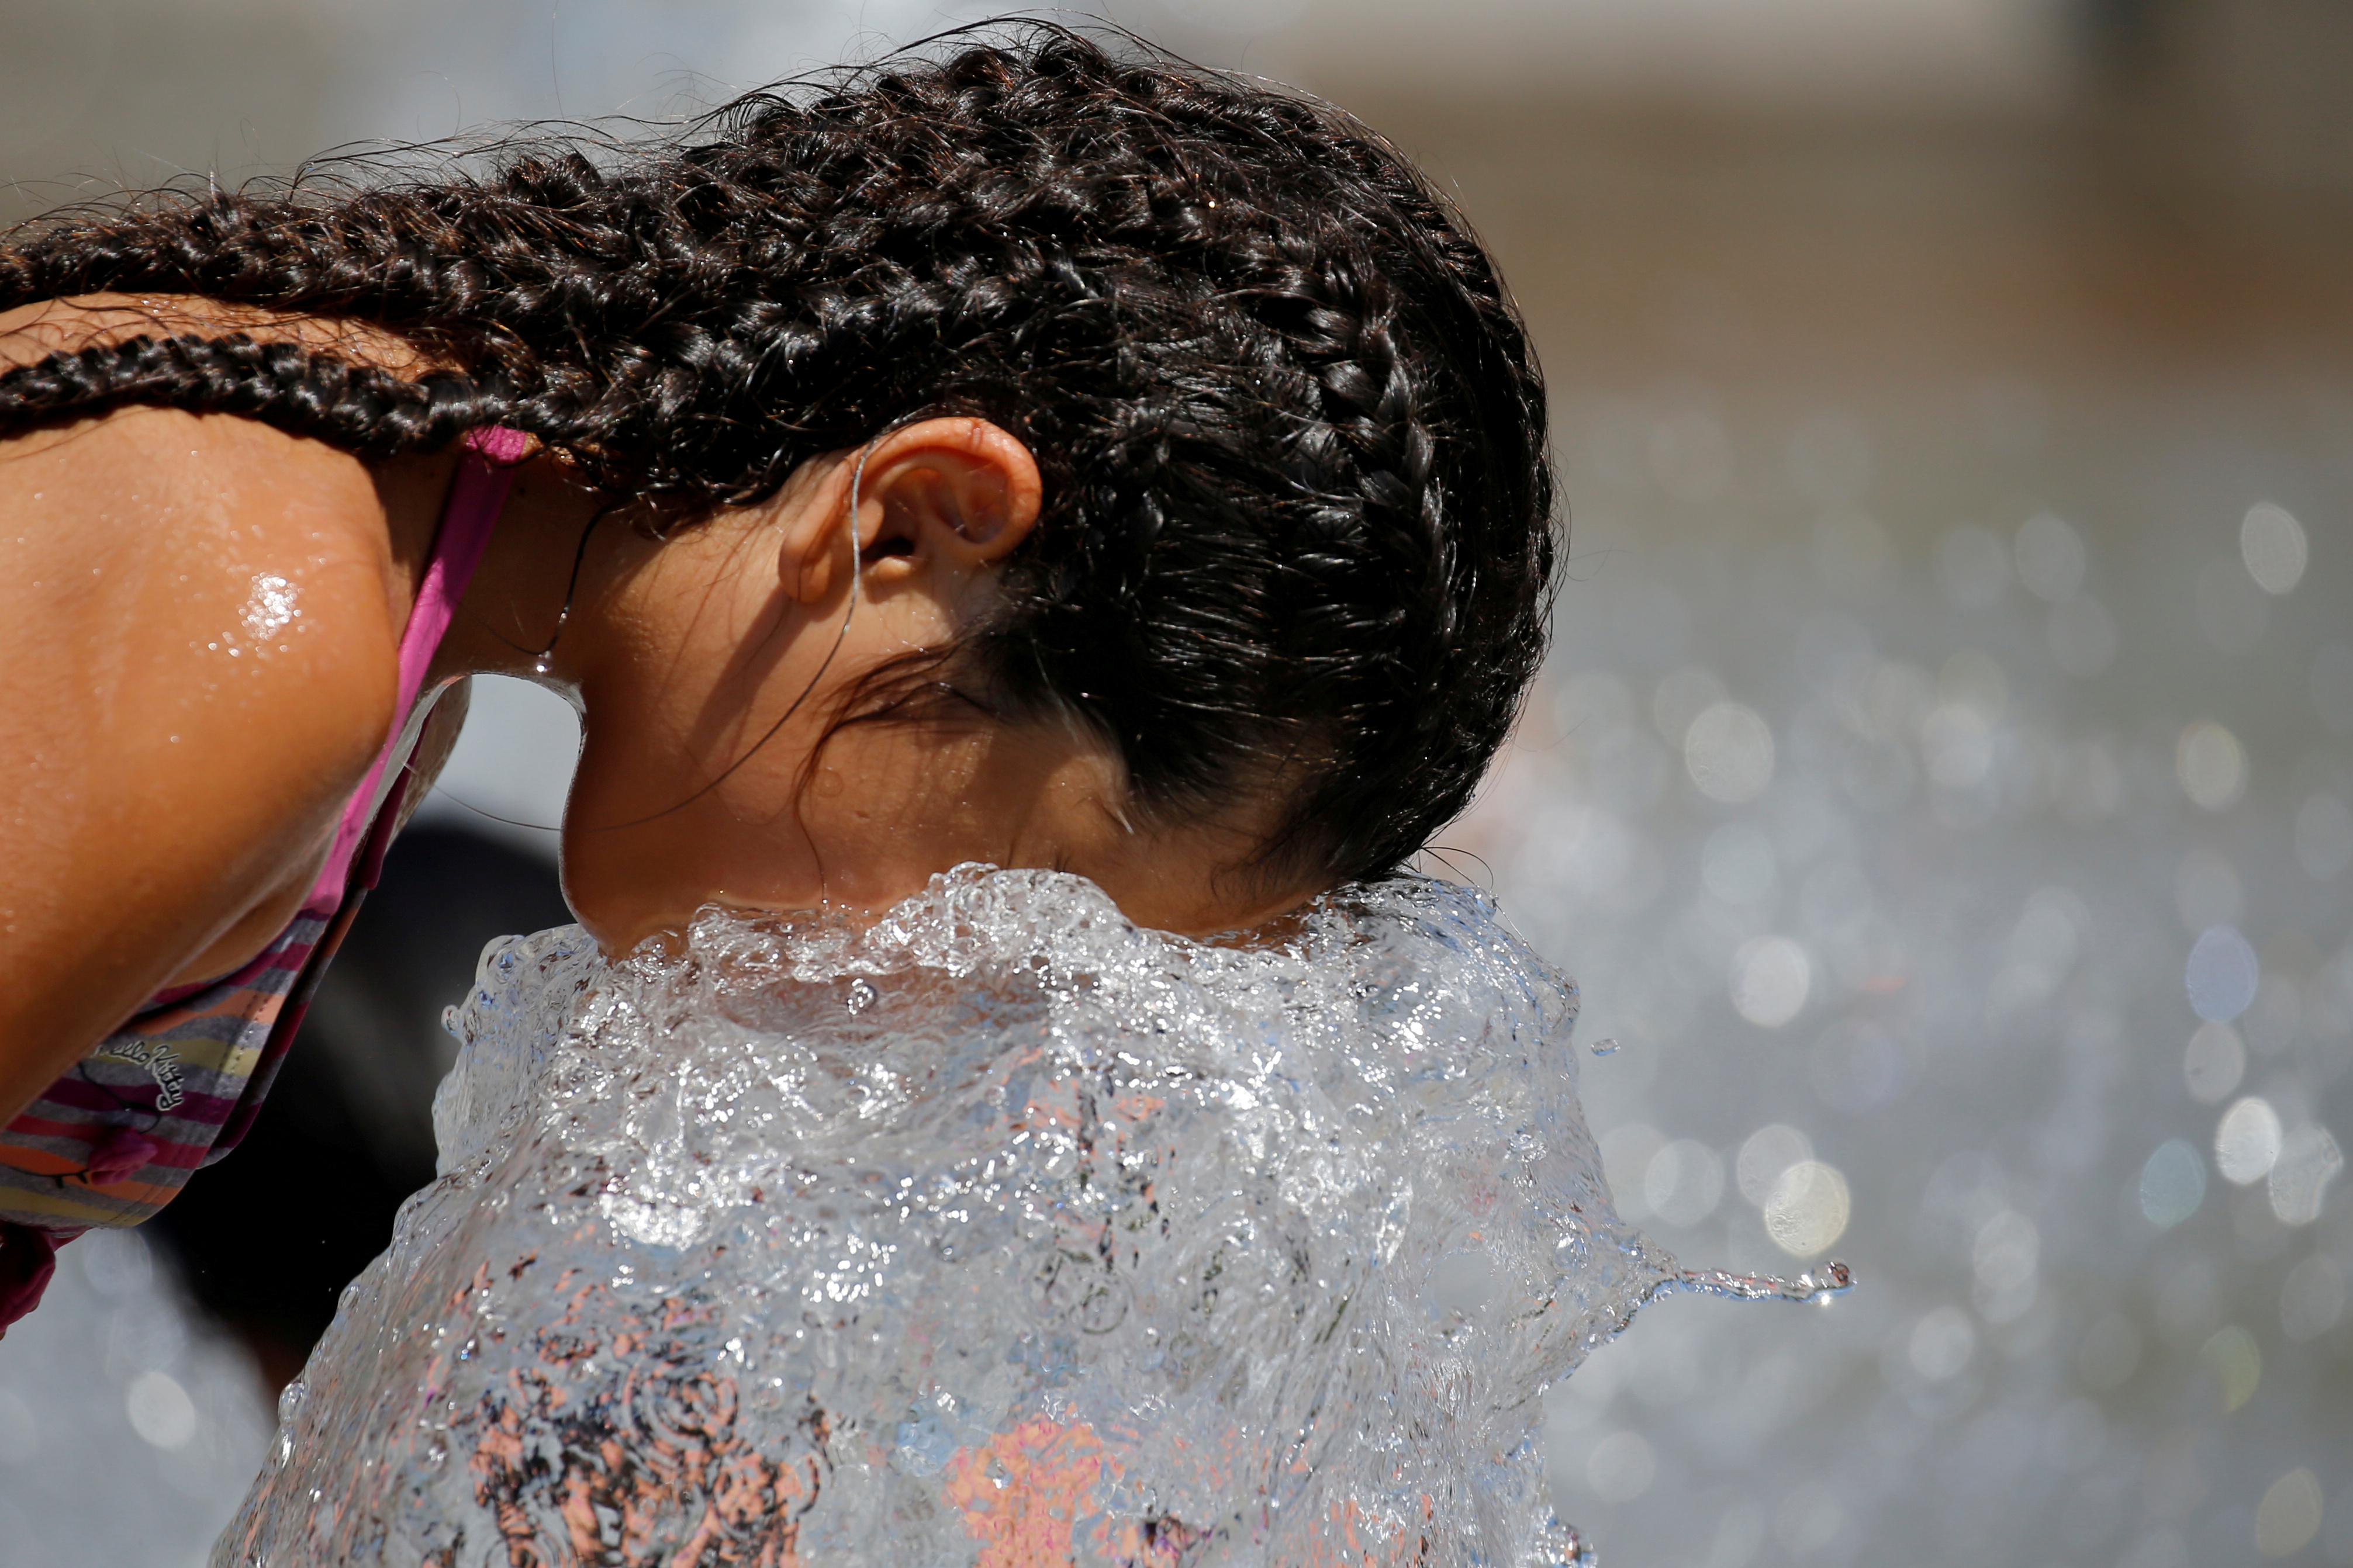 A child cools off in a fountain as a summer heatwave with high temperatures continues in Paris